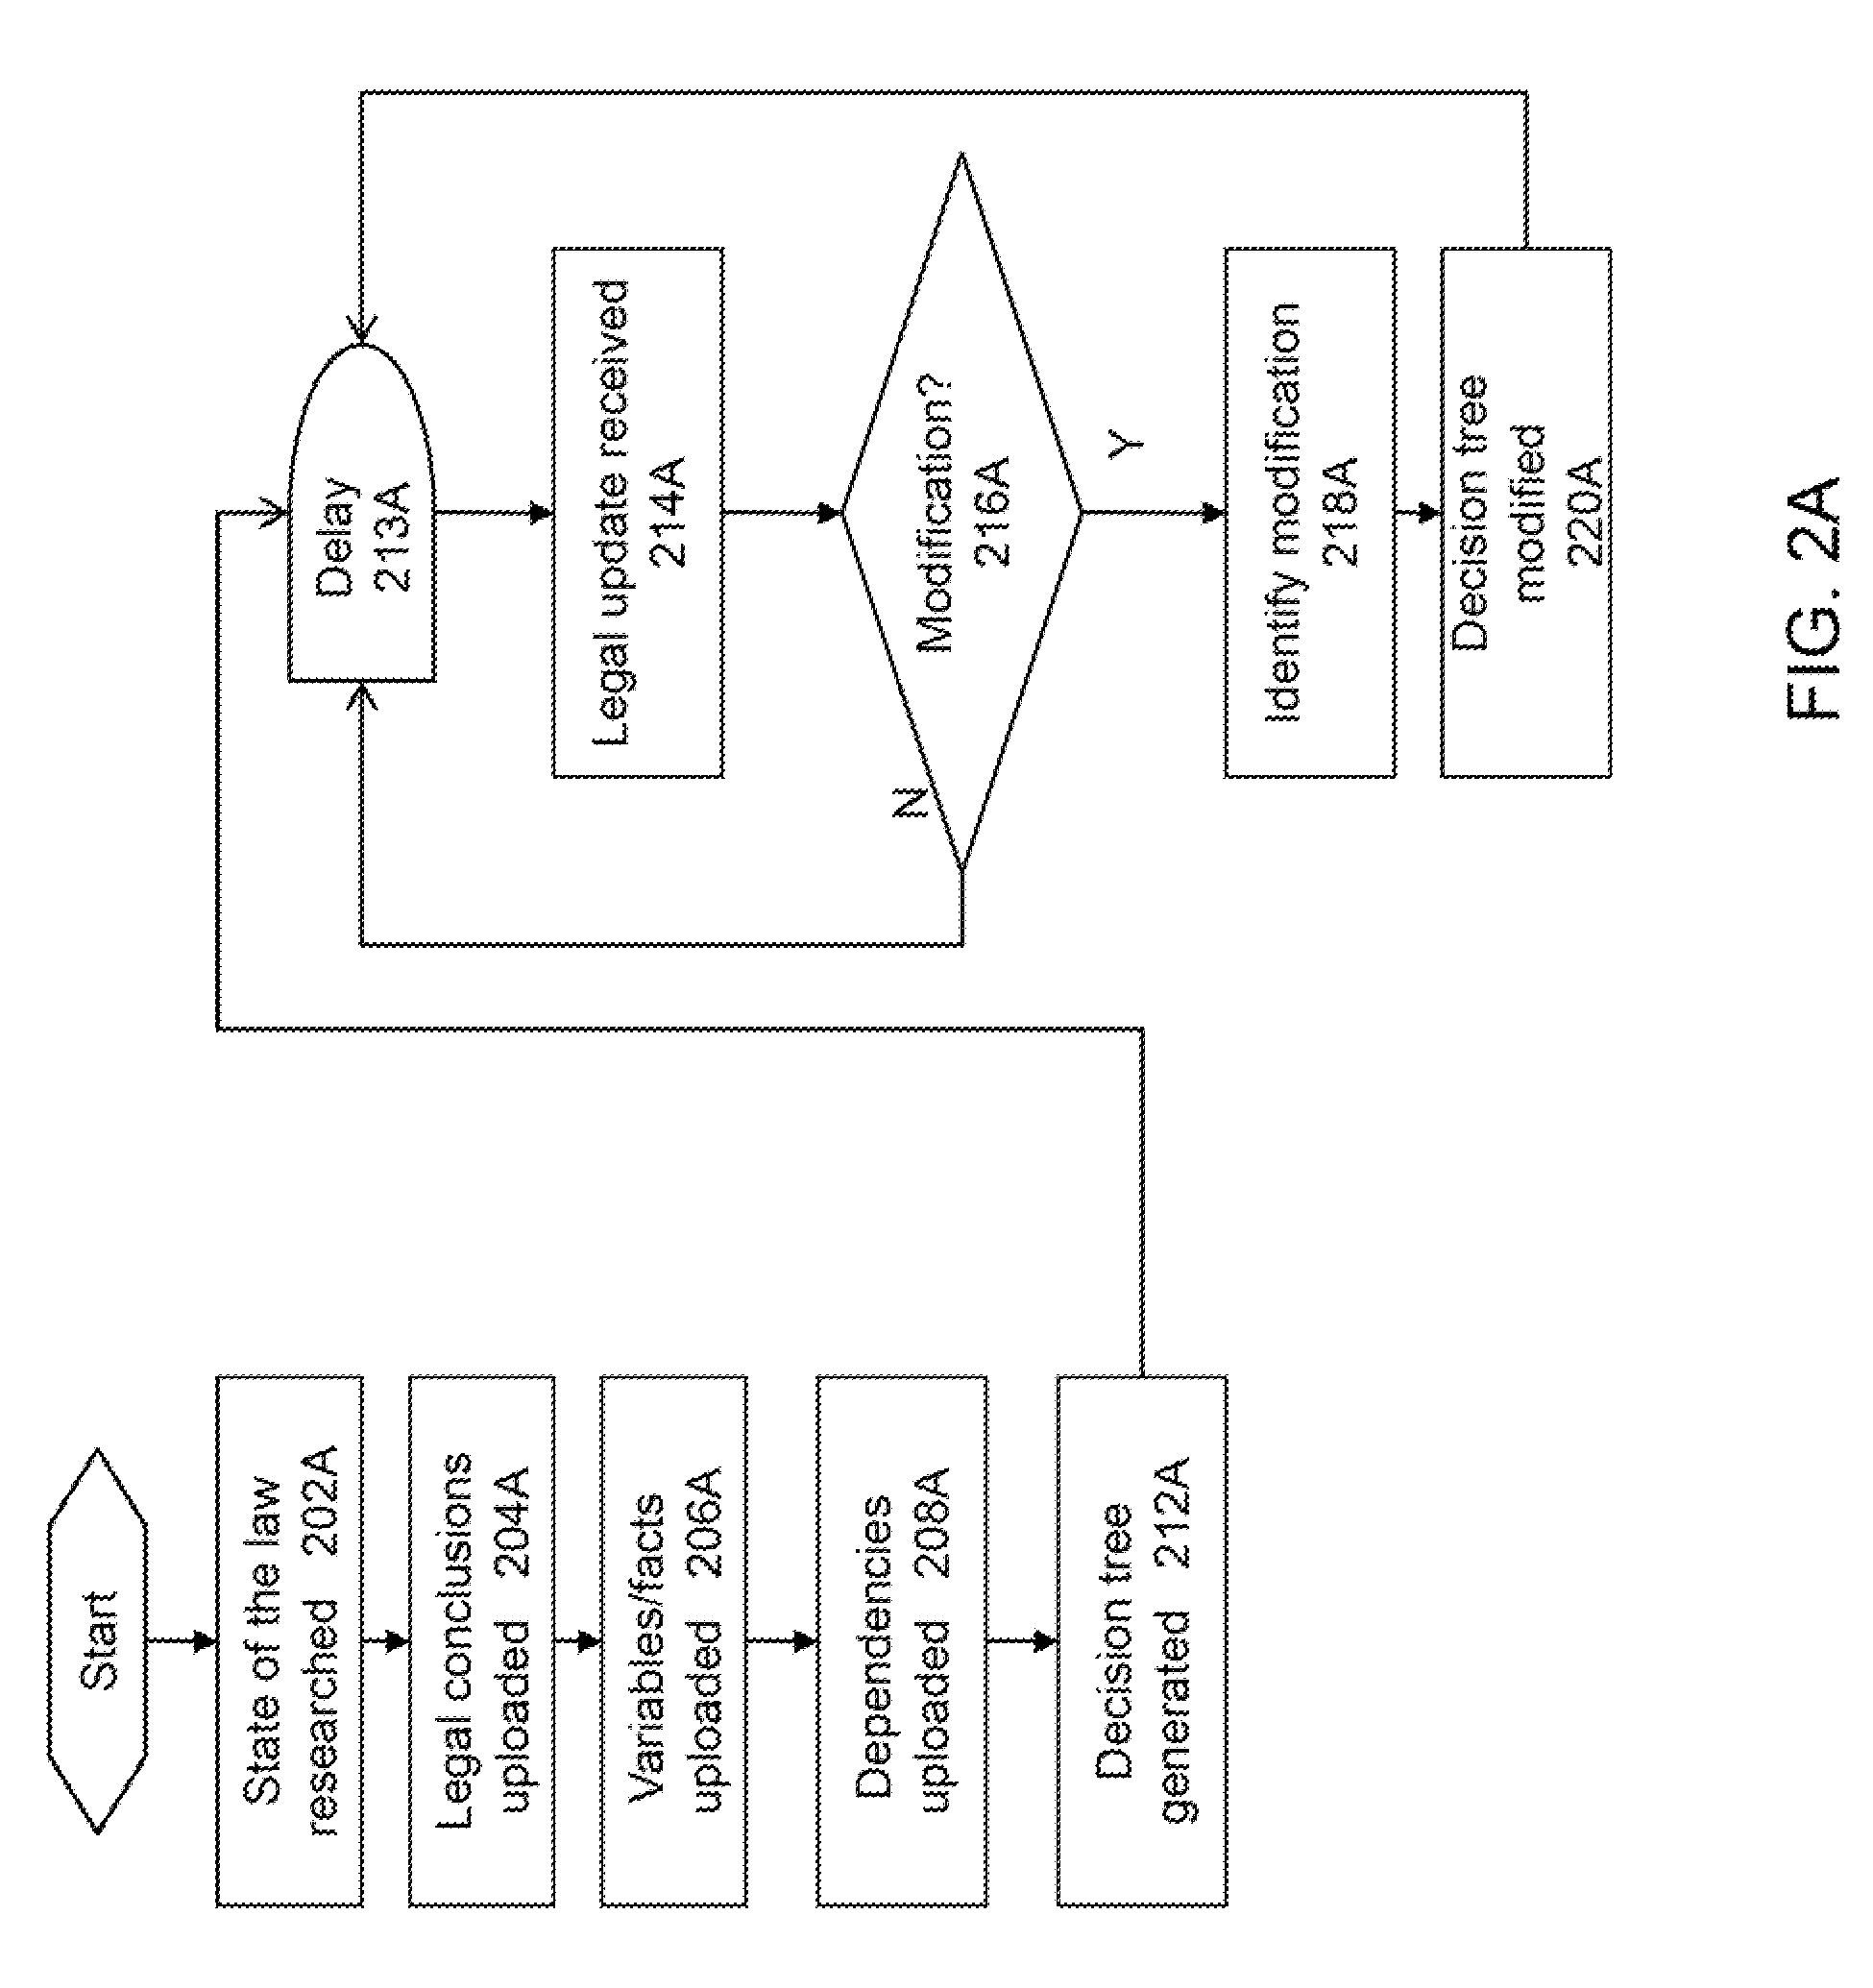 Automated Legal Evaluation Using a Decision Tree over a Communications Network